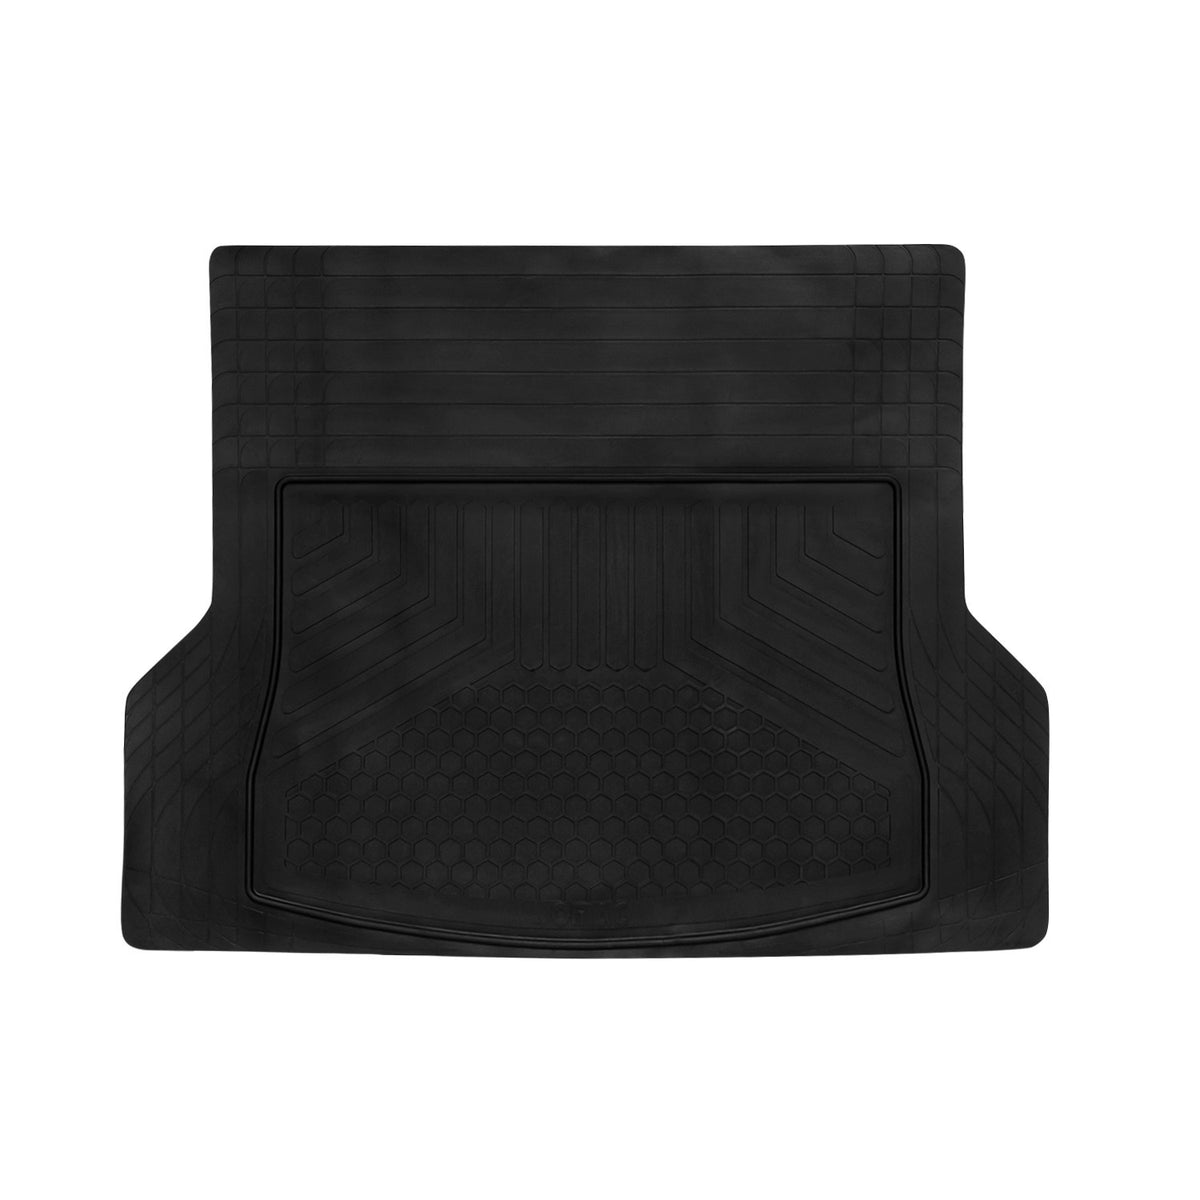 Boot liner anti-slip mat boot liner trimmable for Mercedes CLA Class